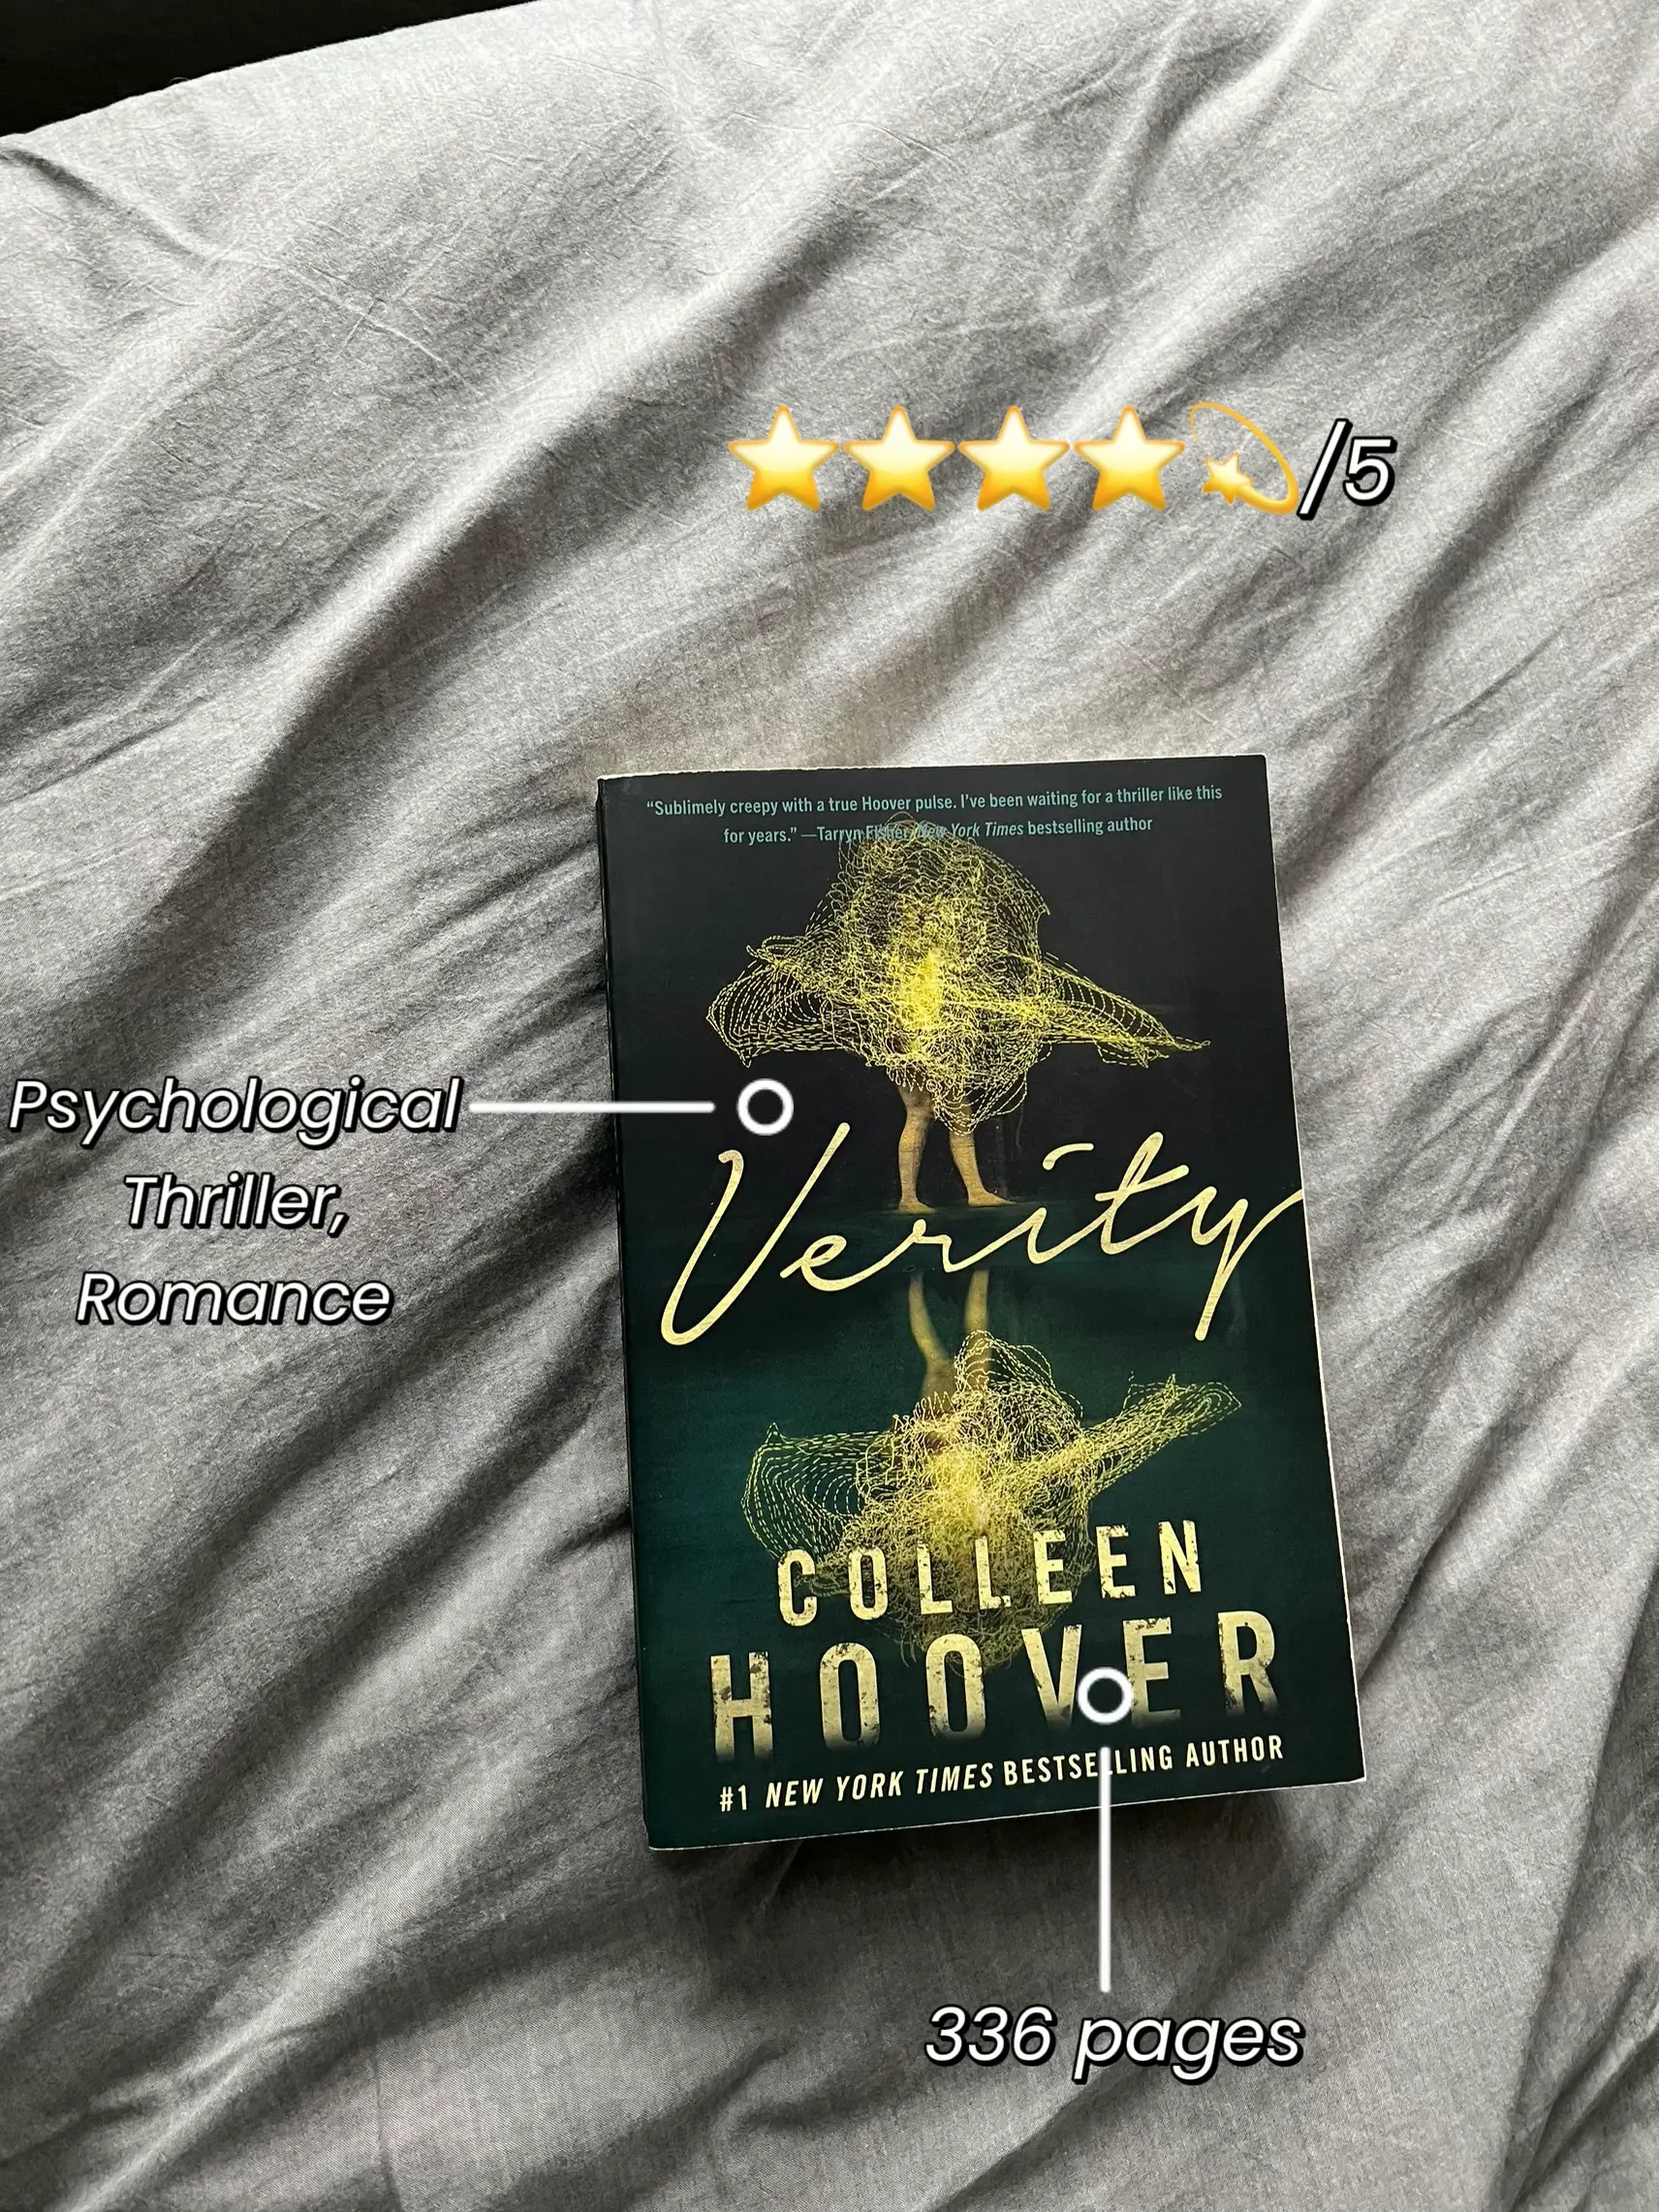 Colleen Hoover's Book, Verity Is a Thrilling and Spicey Read